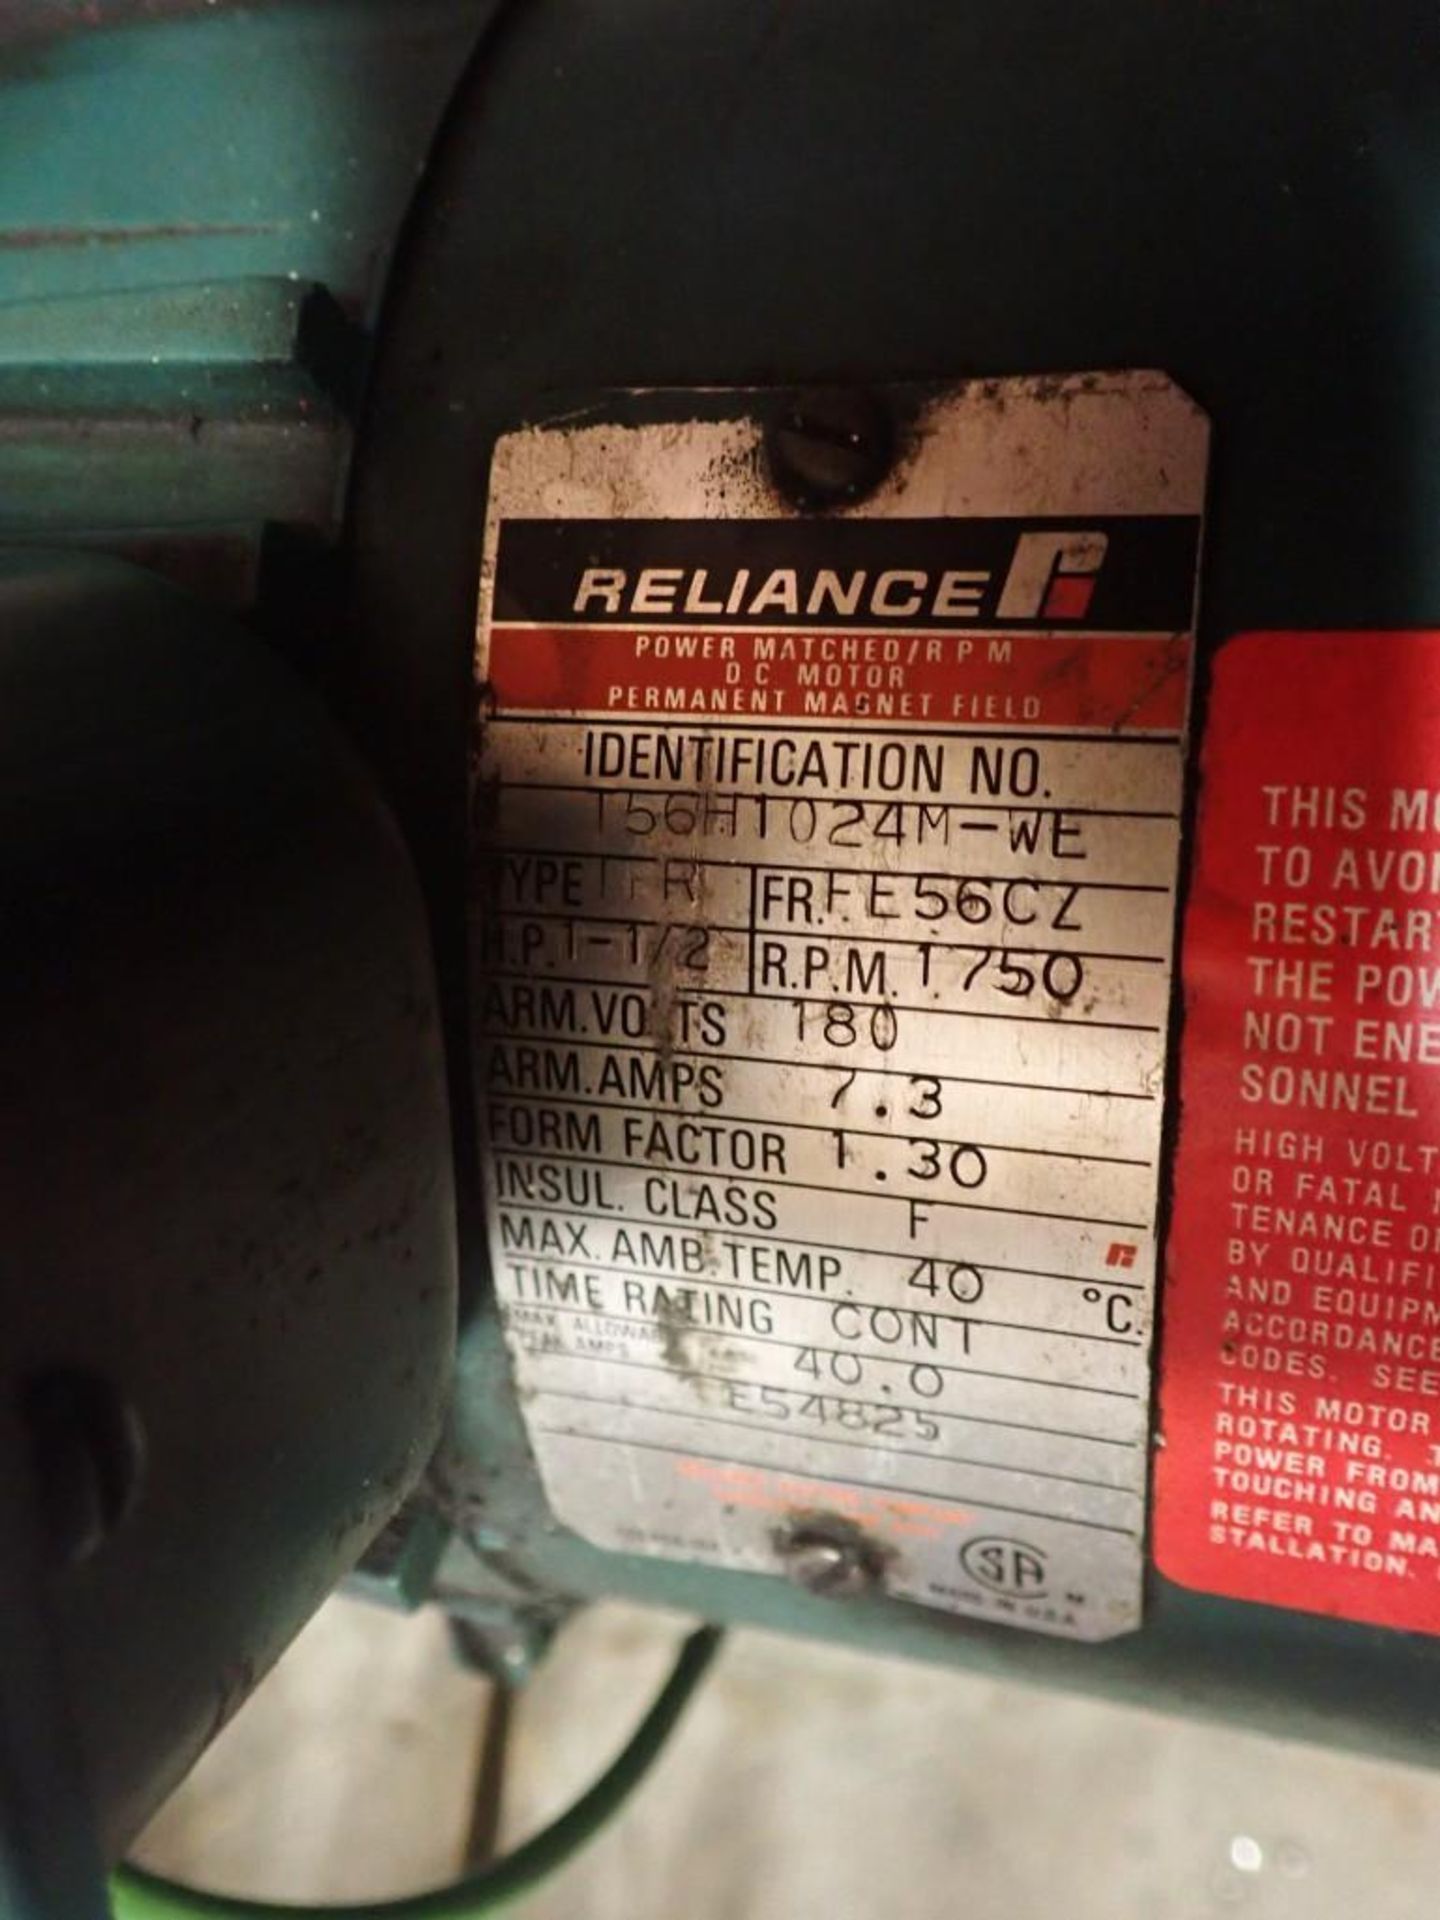 Reliance Motor w/Gear Reducer #T56H1024M-WE/M94513 - Image 4 of 5